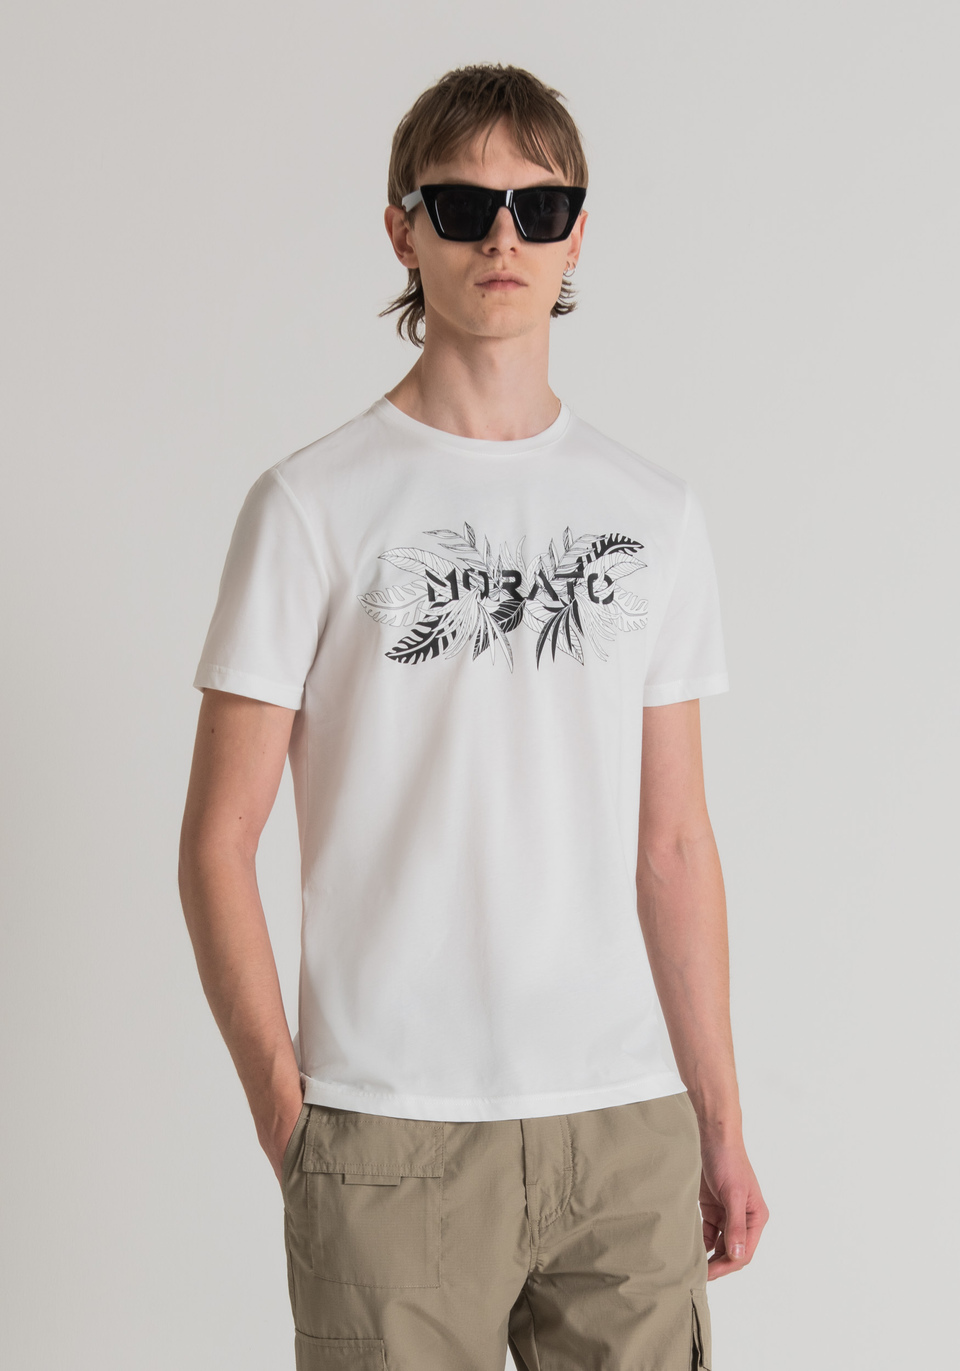 SLIM-FIT T-SHIRT IN SOFT COTTON WITH LOGO AND FLORAL PRINT - Antony Morato Online Shop